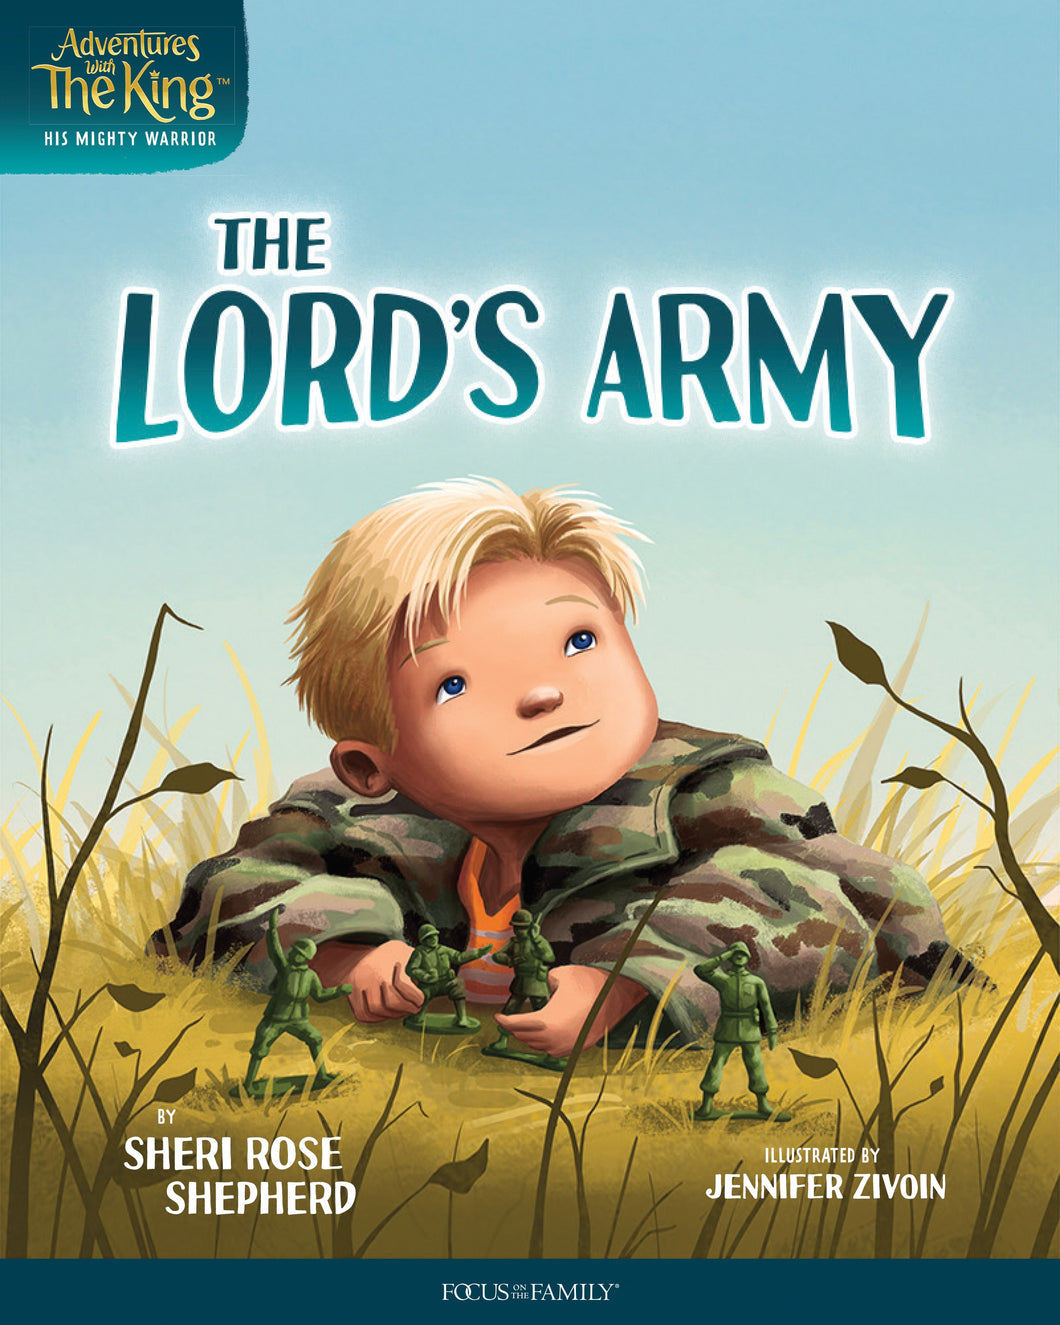 The Lord's Army (Adventures With The King)